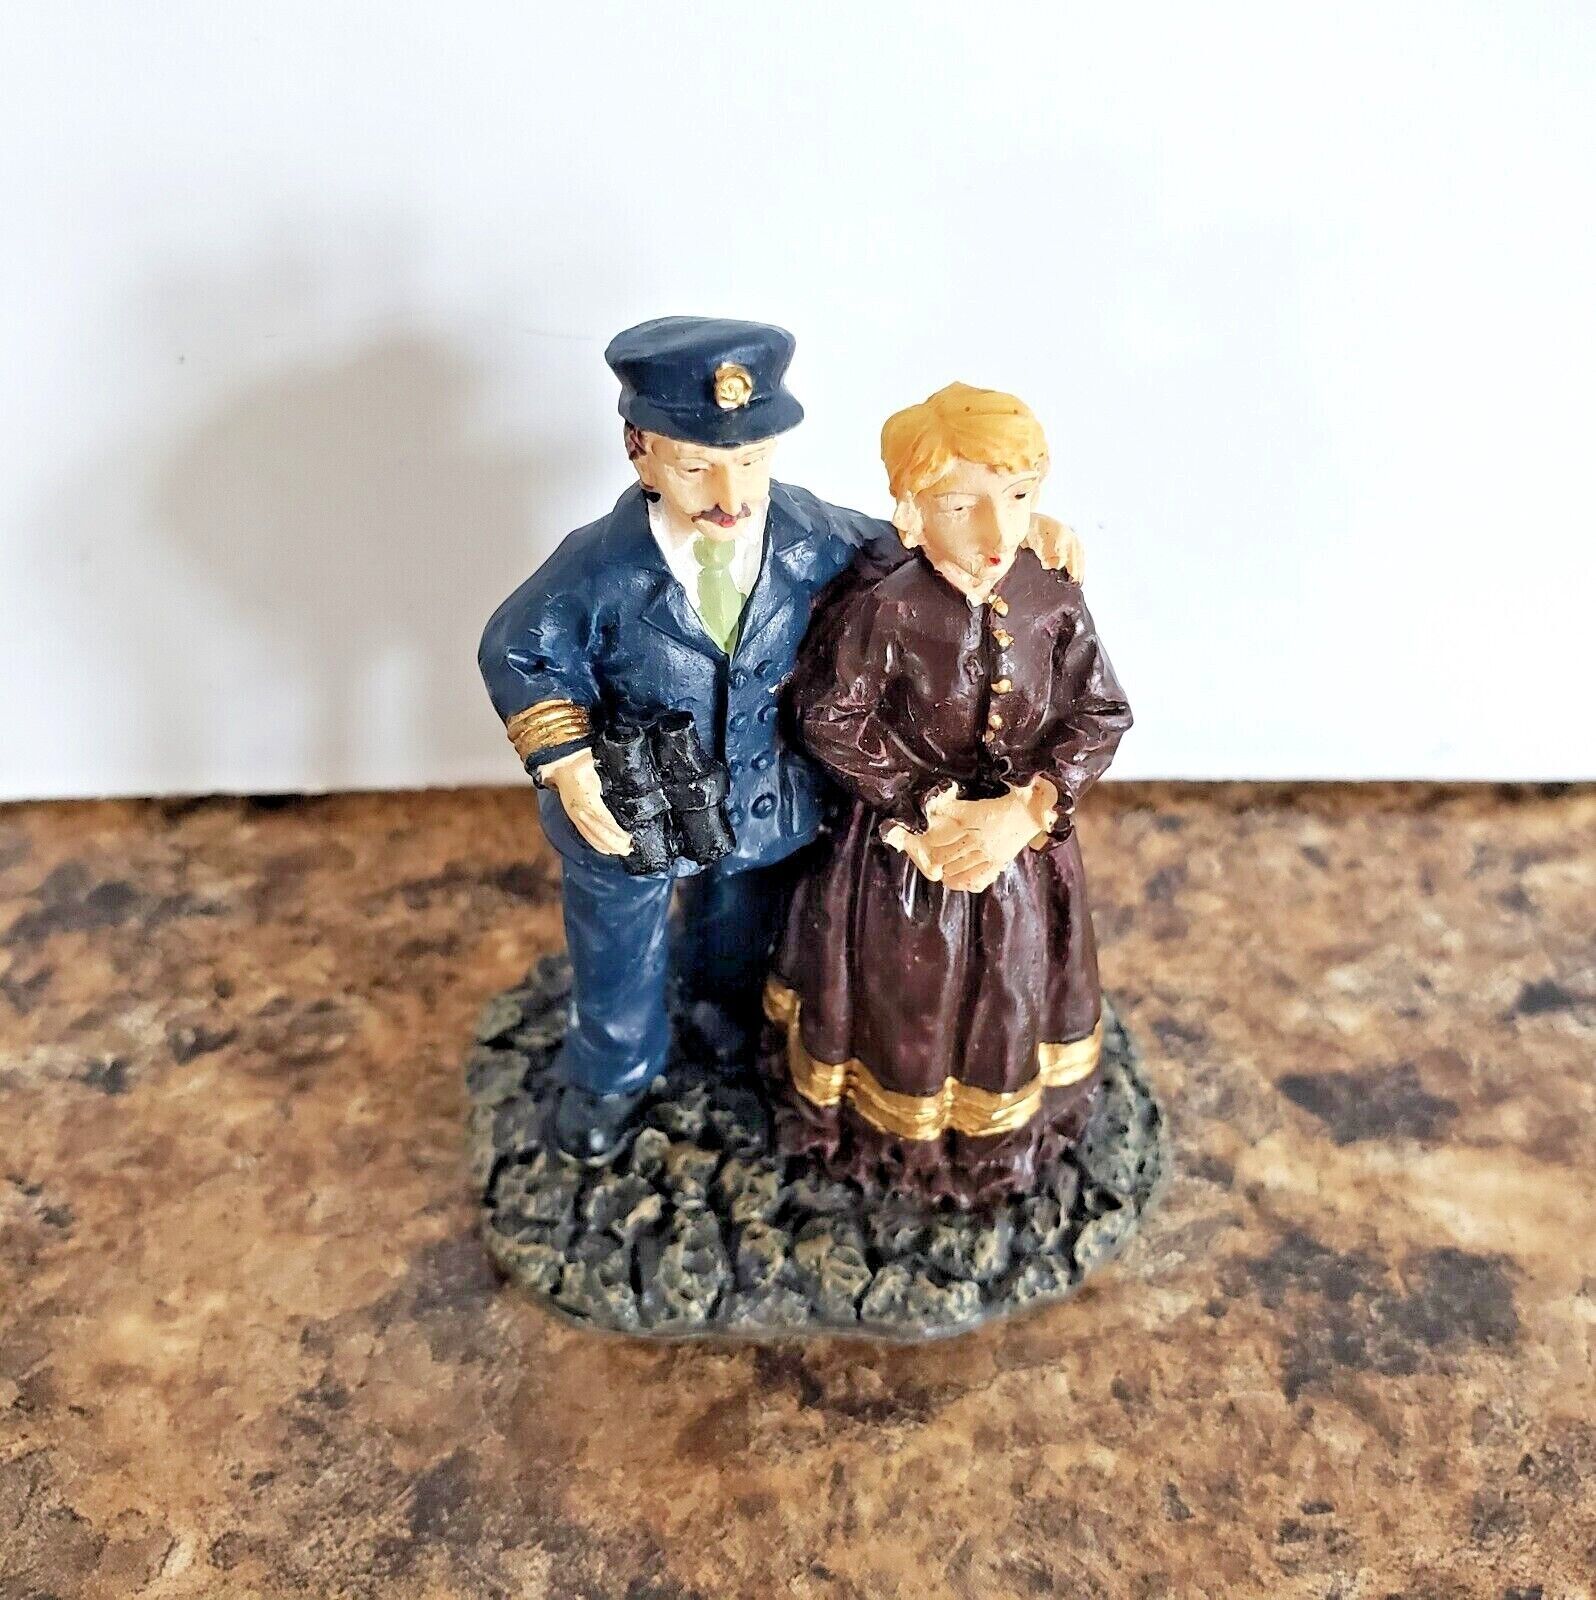 Christmas Village Small Figurine Man and Lady with Binoculars 2 1/4" Tall Resin - $4.94